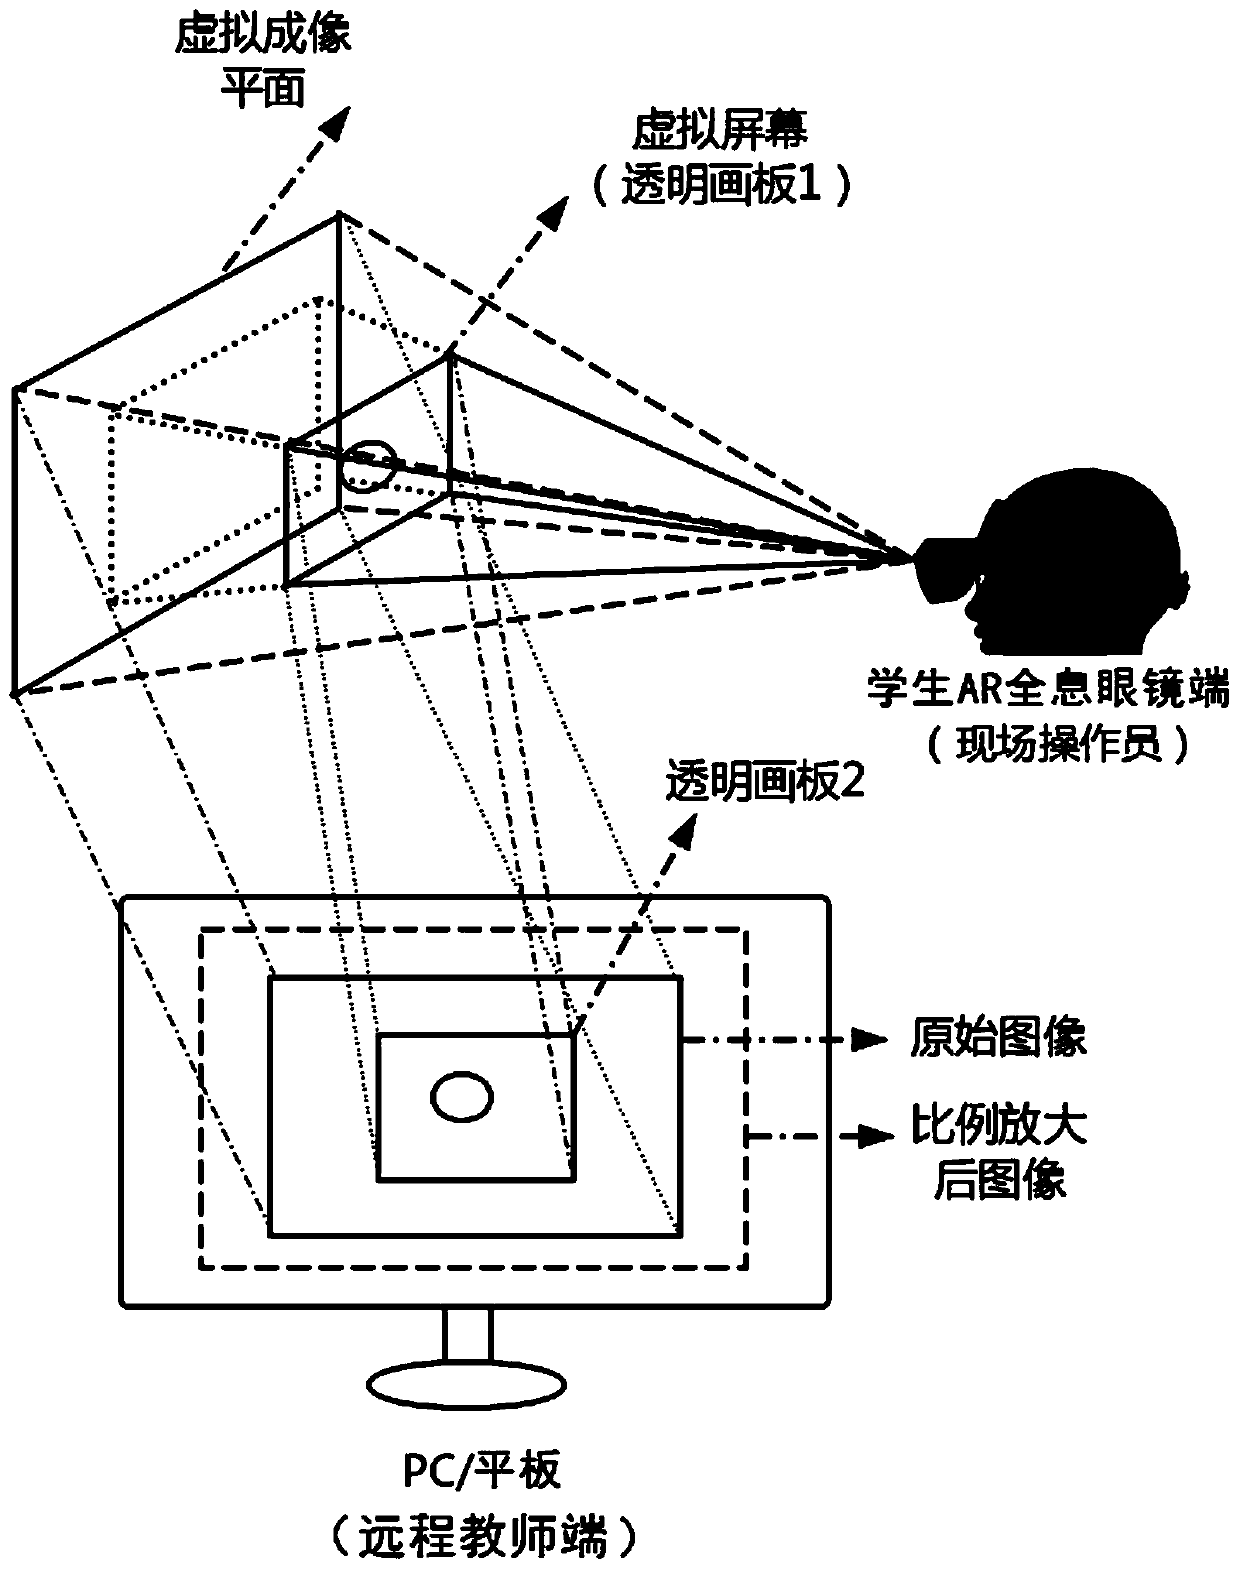 Remote education data interaction system and method based on AR holographic glasses